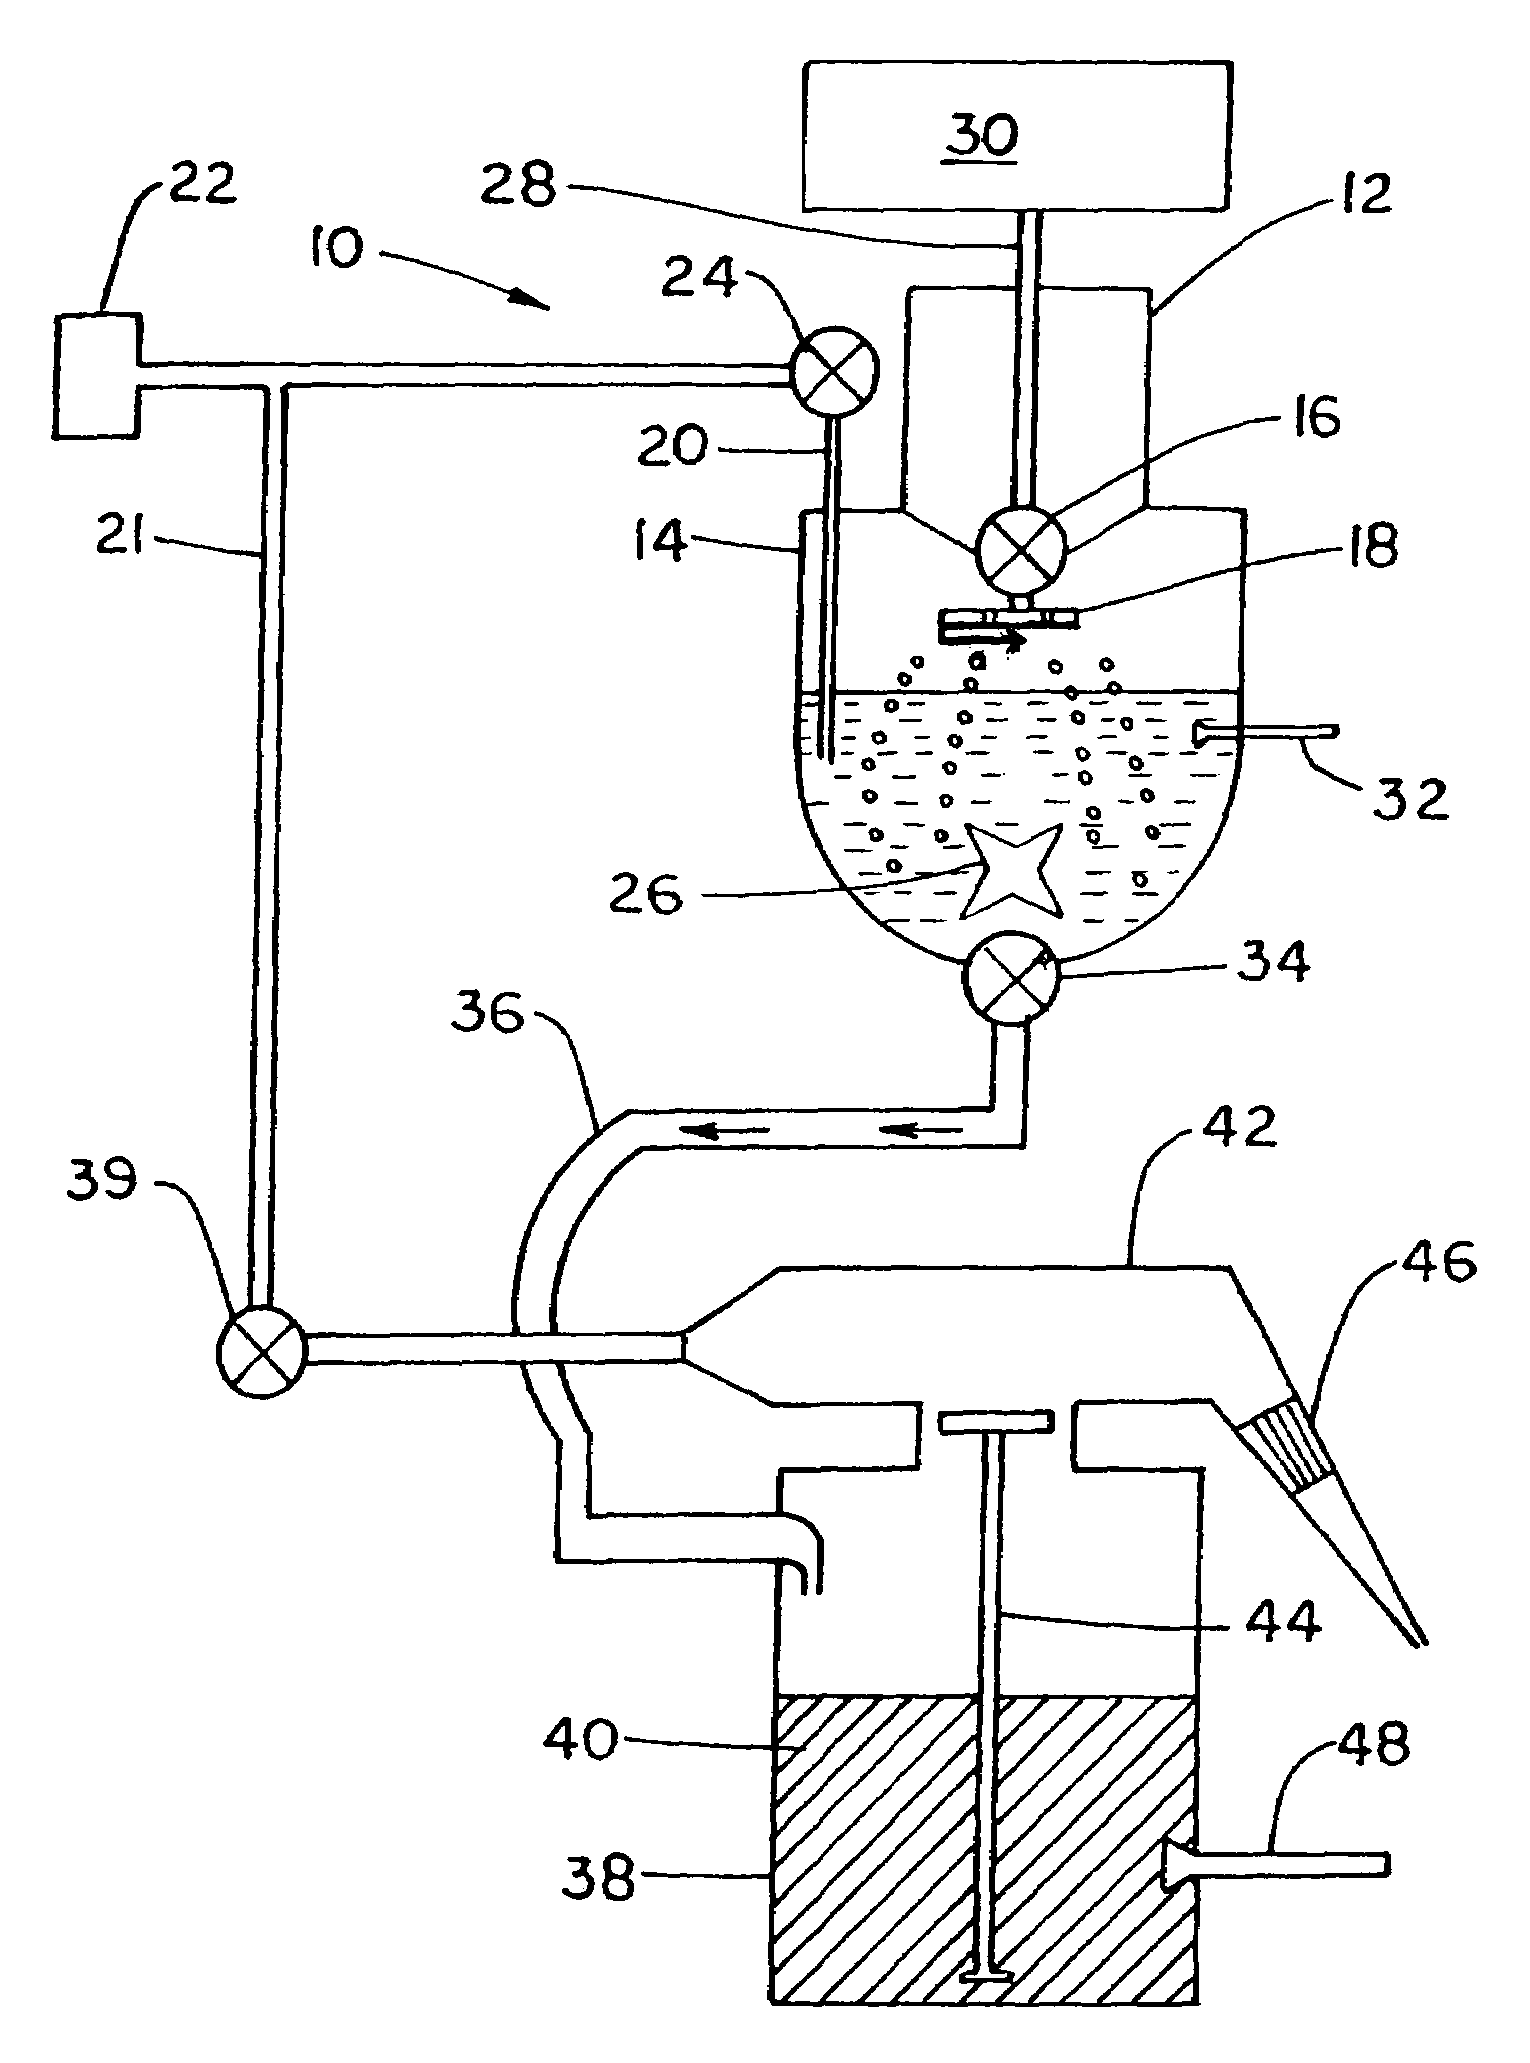 Apparatus for mixing and dispensing powder